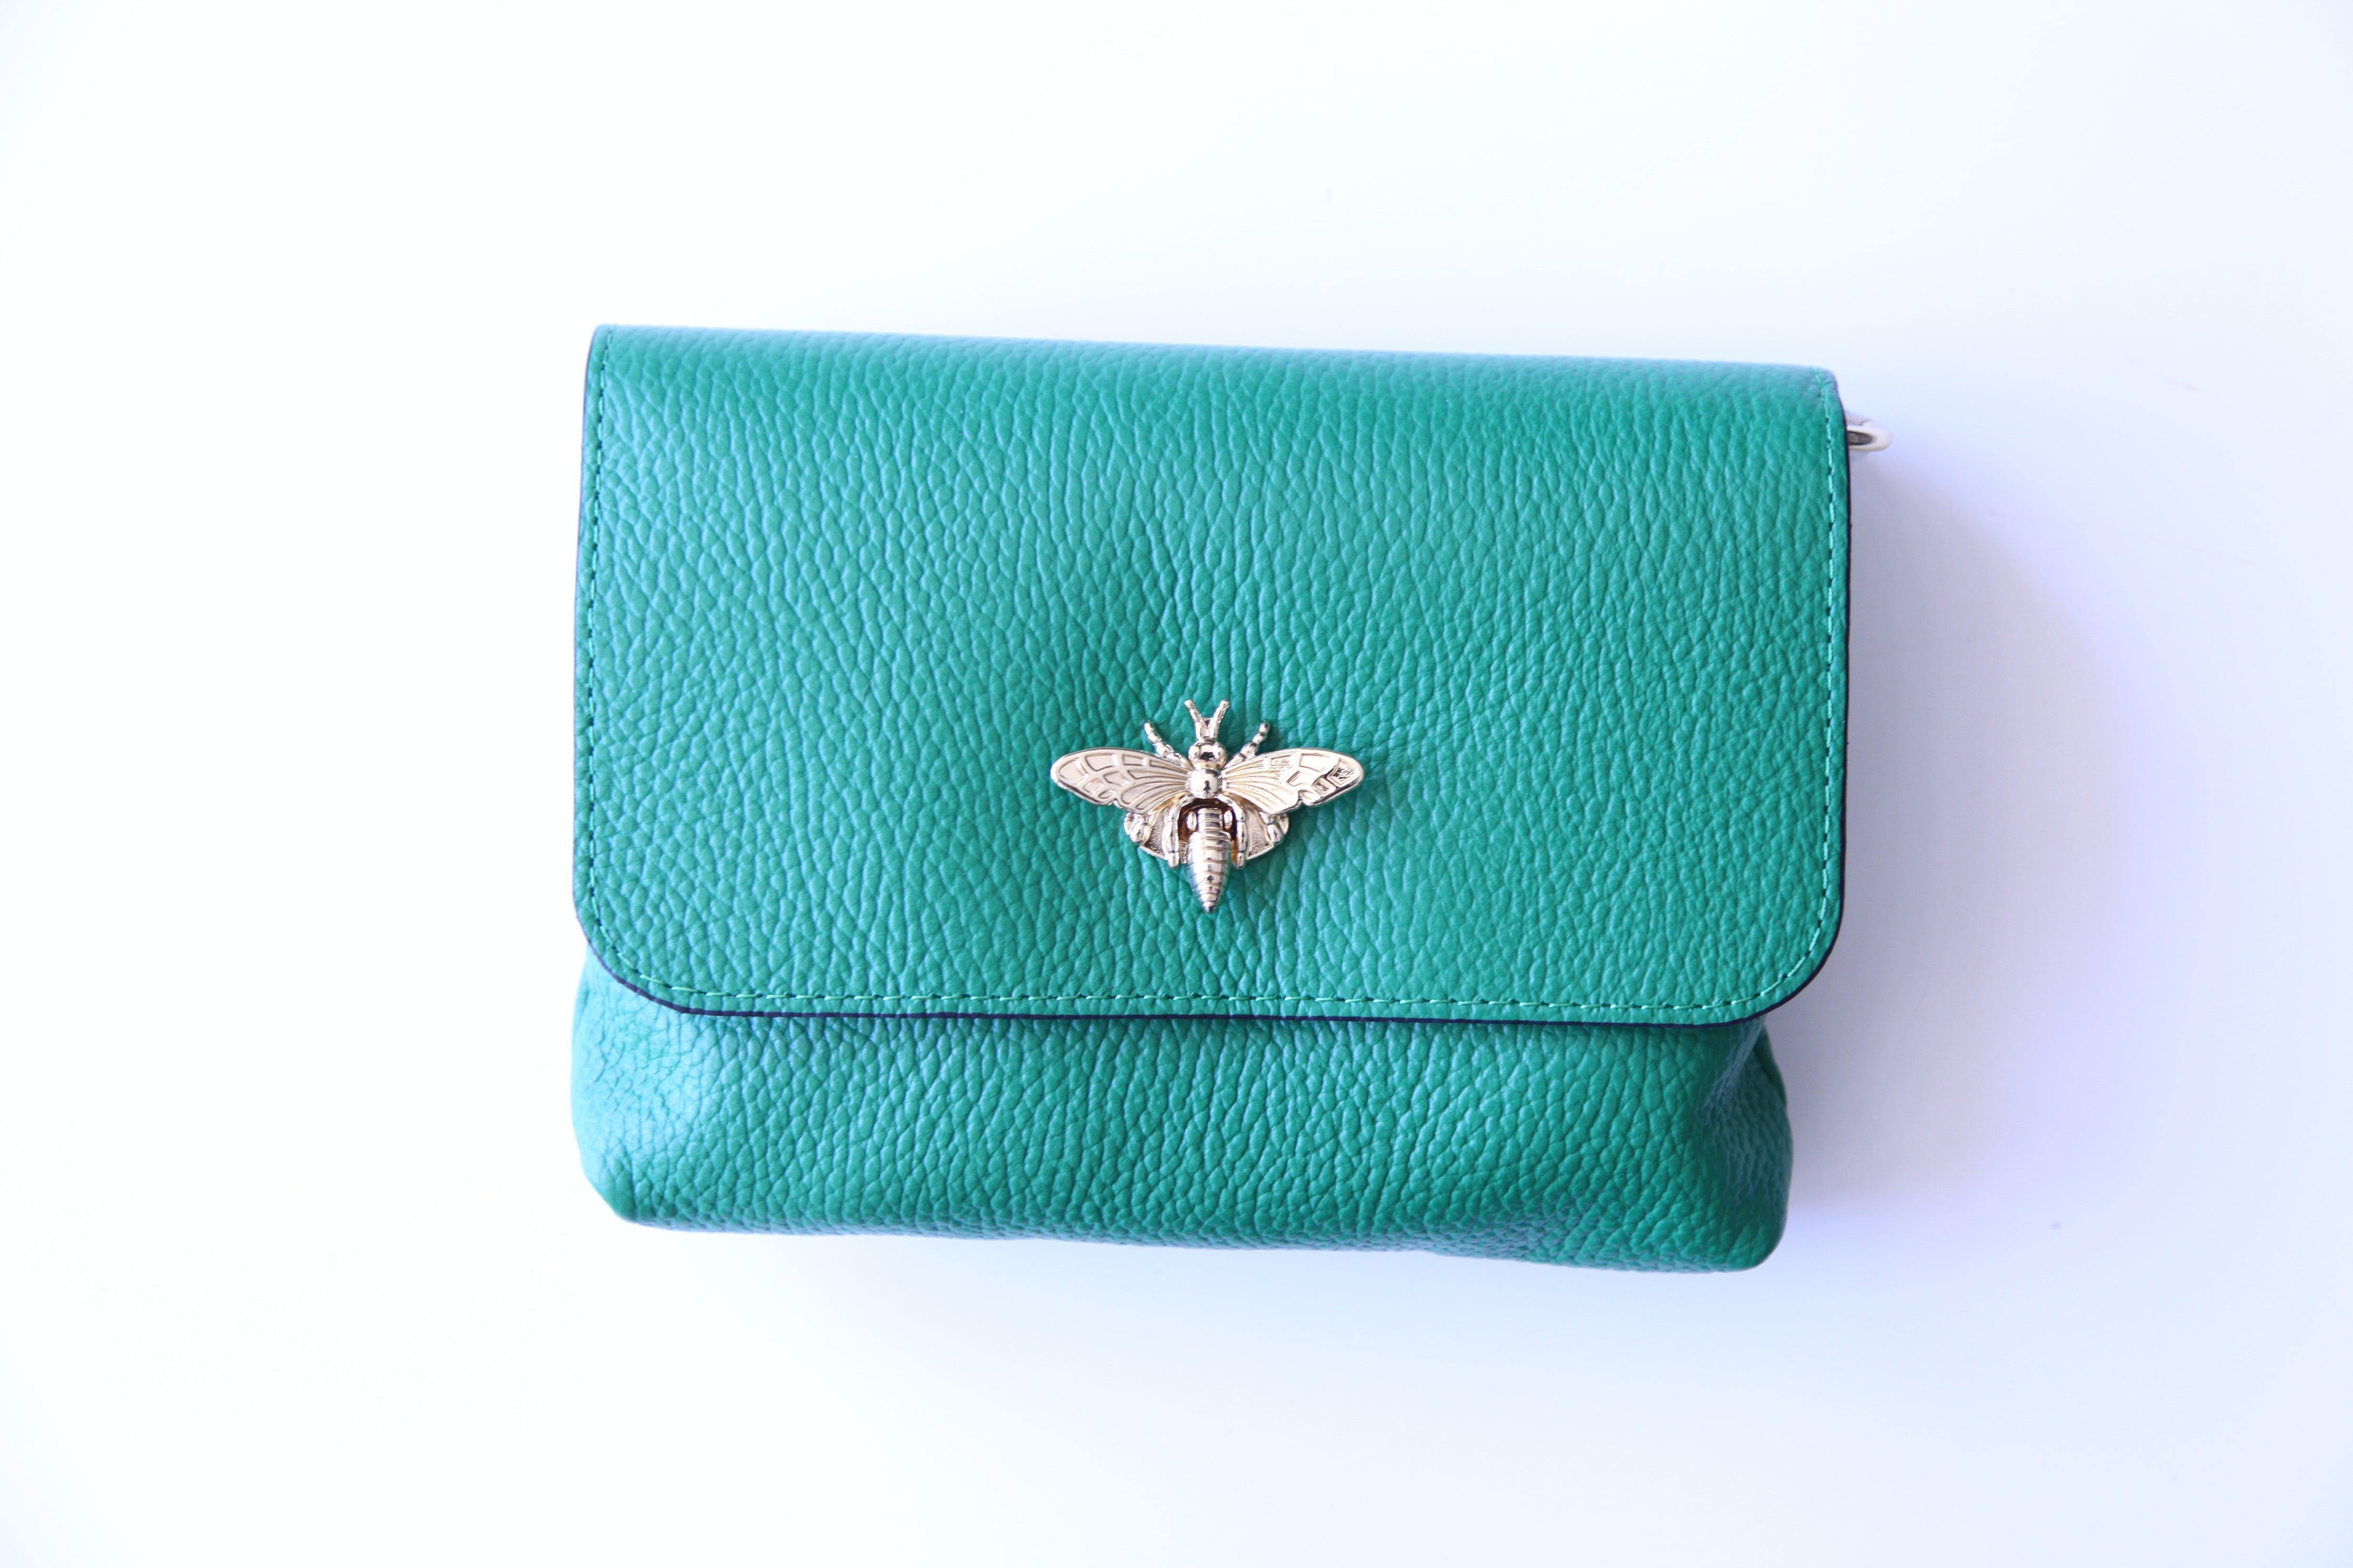 Classic Ladies' Leather Clasp Purse | The Sabina | 25 Year Warranty